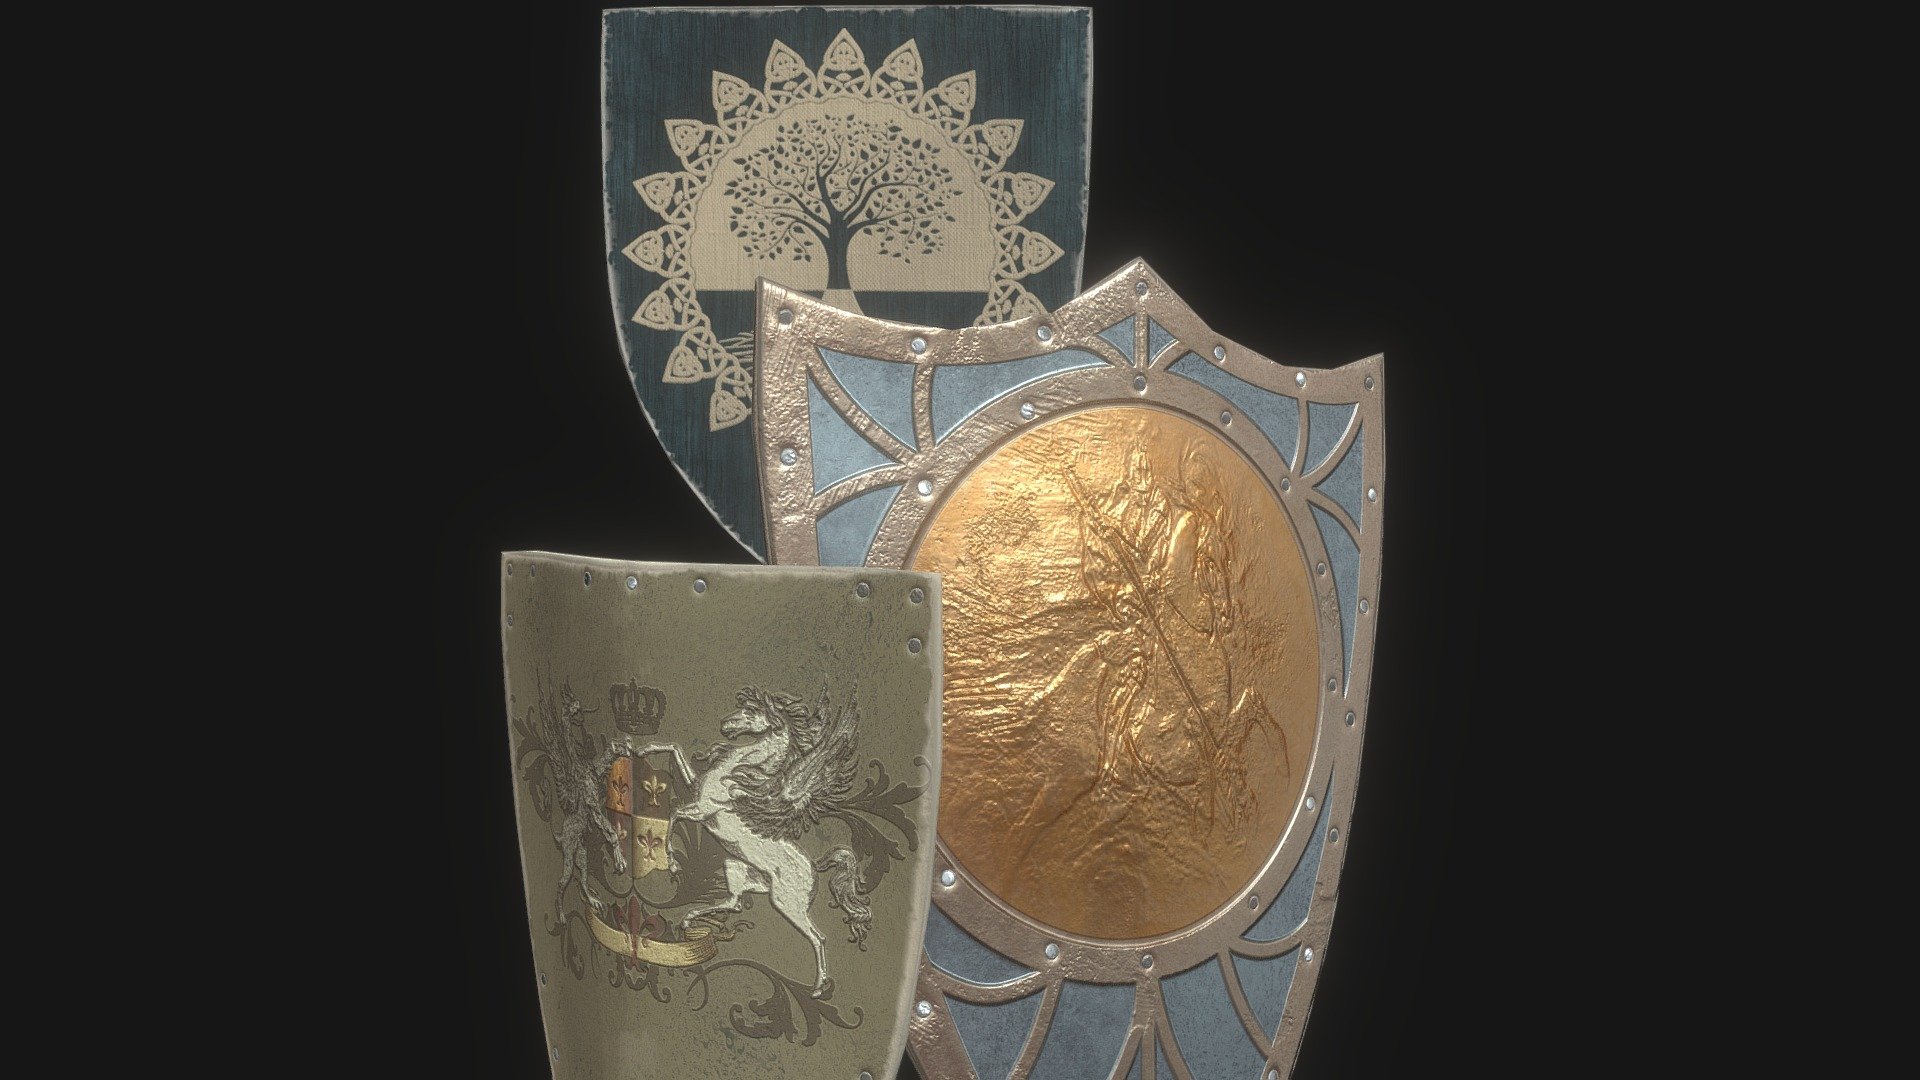 A set of Medieval Kite Shields with Fantasy crests!

If you buy any of my medieval Kite shields, the texture sets are interchangeable across all 4 models!

Designed for games in Low-poly PBR including Albedo, Normal, Metallic, AO, and Roughness 4K textures.

Horned Kite - 568 Triangles. Flattop Kite - 496 Triangles. Wooden Small Kite - 532 Triangles 3d model